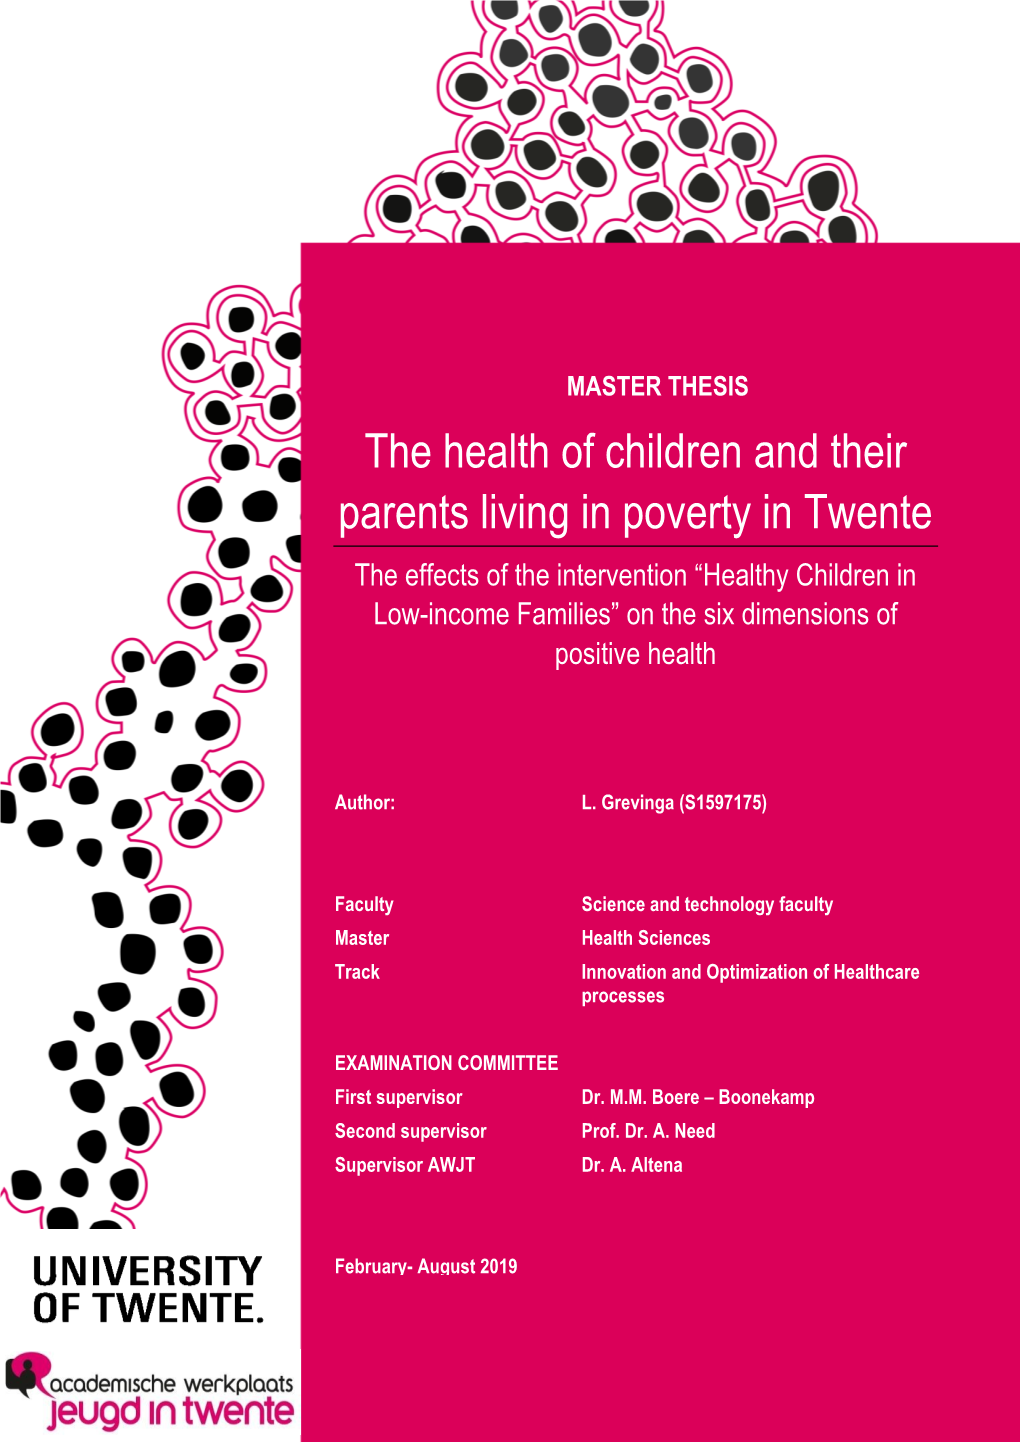 The Health of Children and Their Parents Living in Poverty in Twente